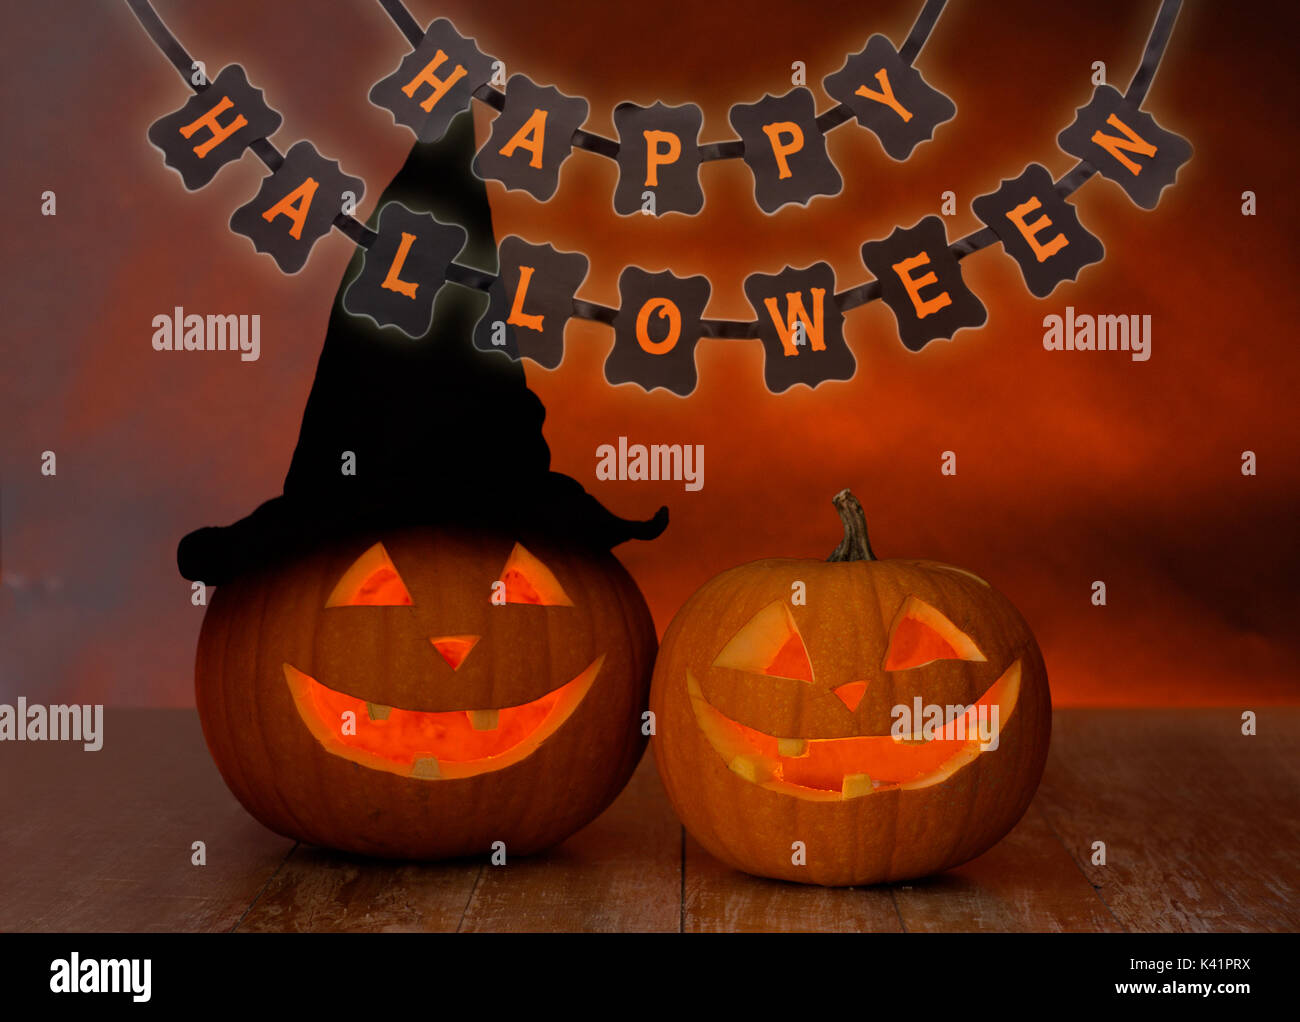 carved pumpkins and happy halloween garland Stock Photo